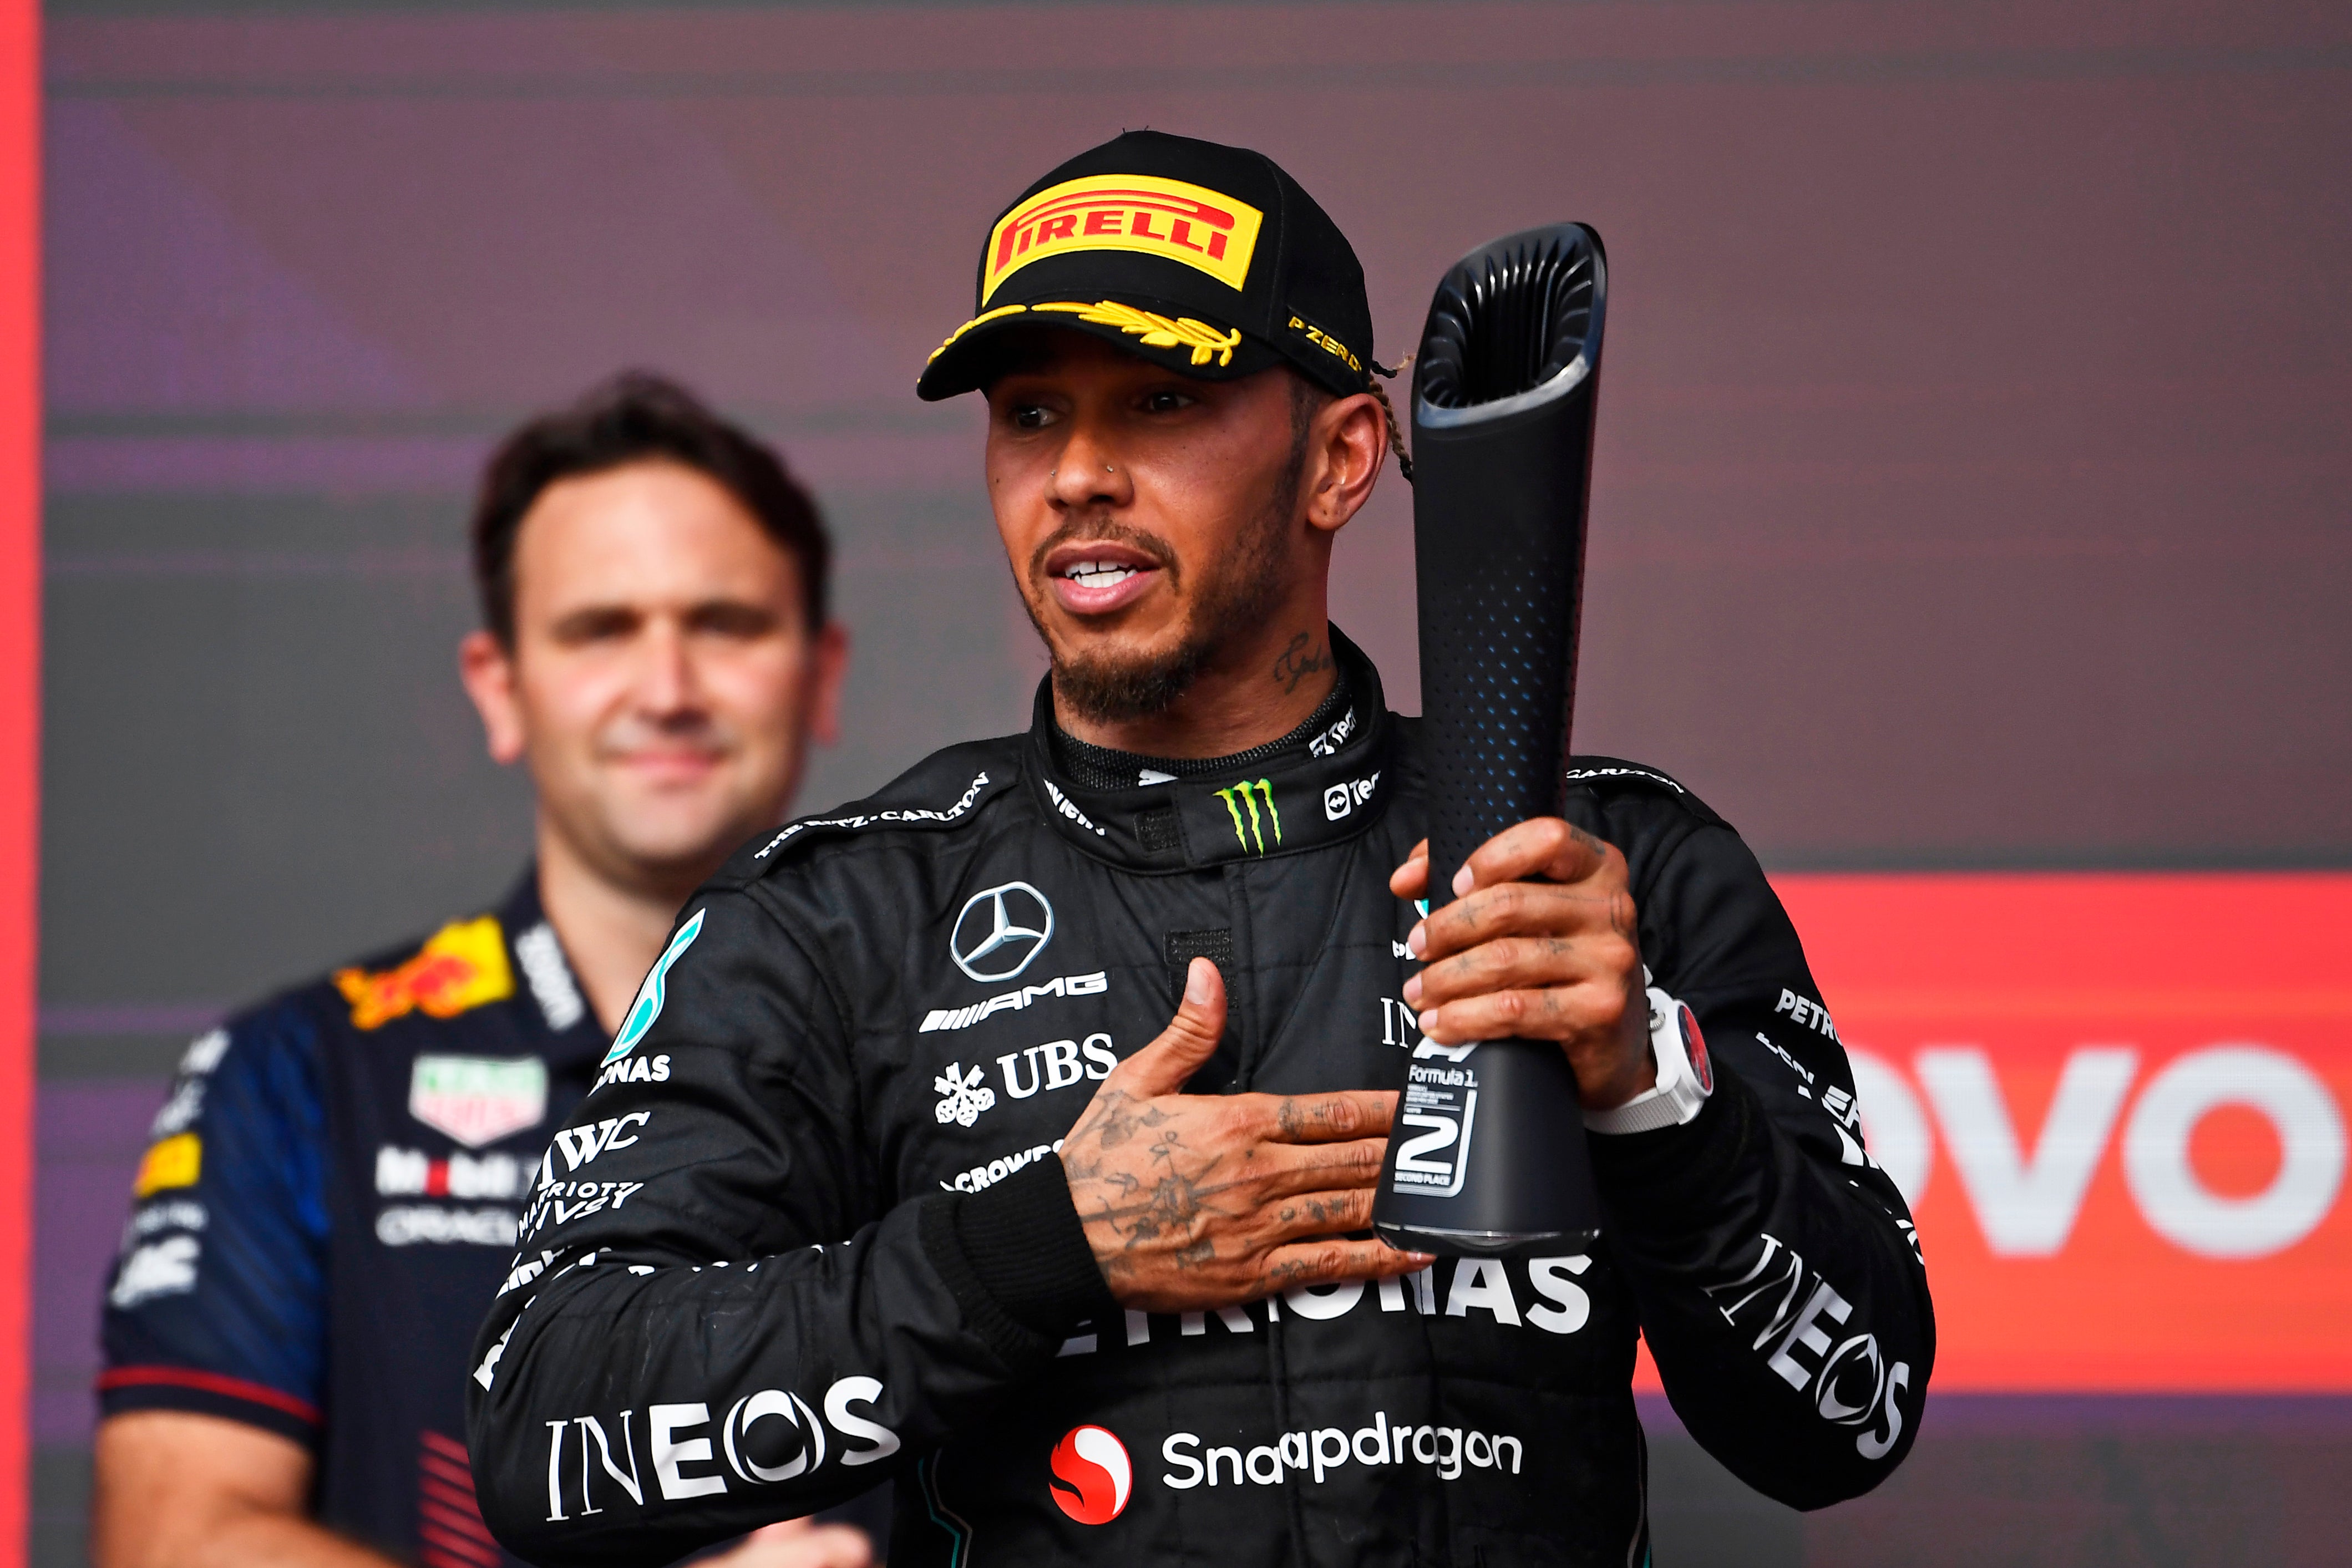 Hamilton has been disqualified at the US Grand Prix